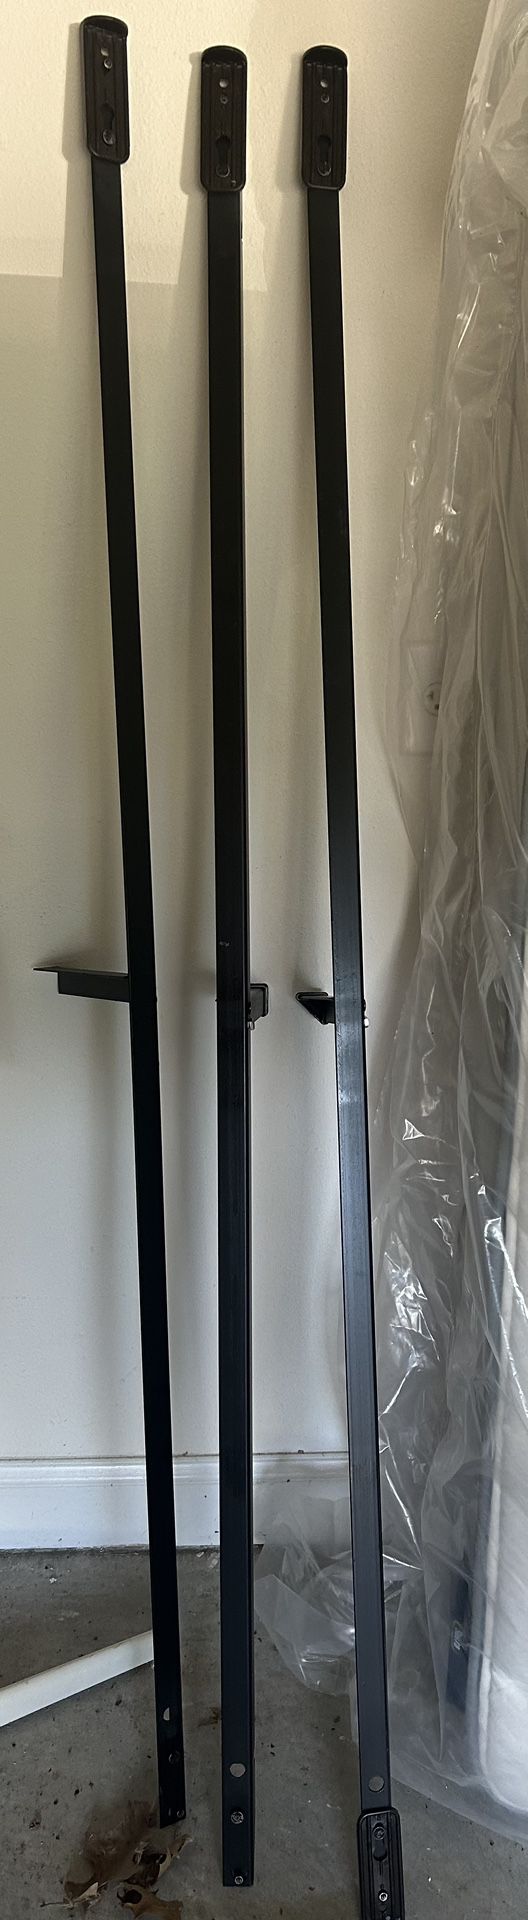 Queen wood bed frame with metal bars